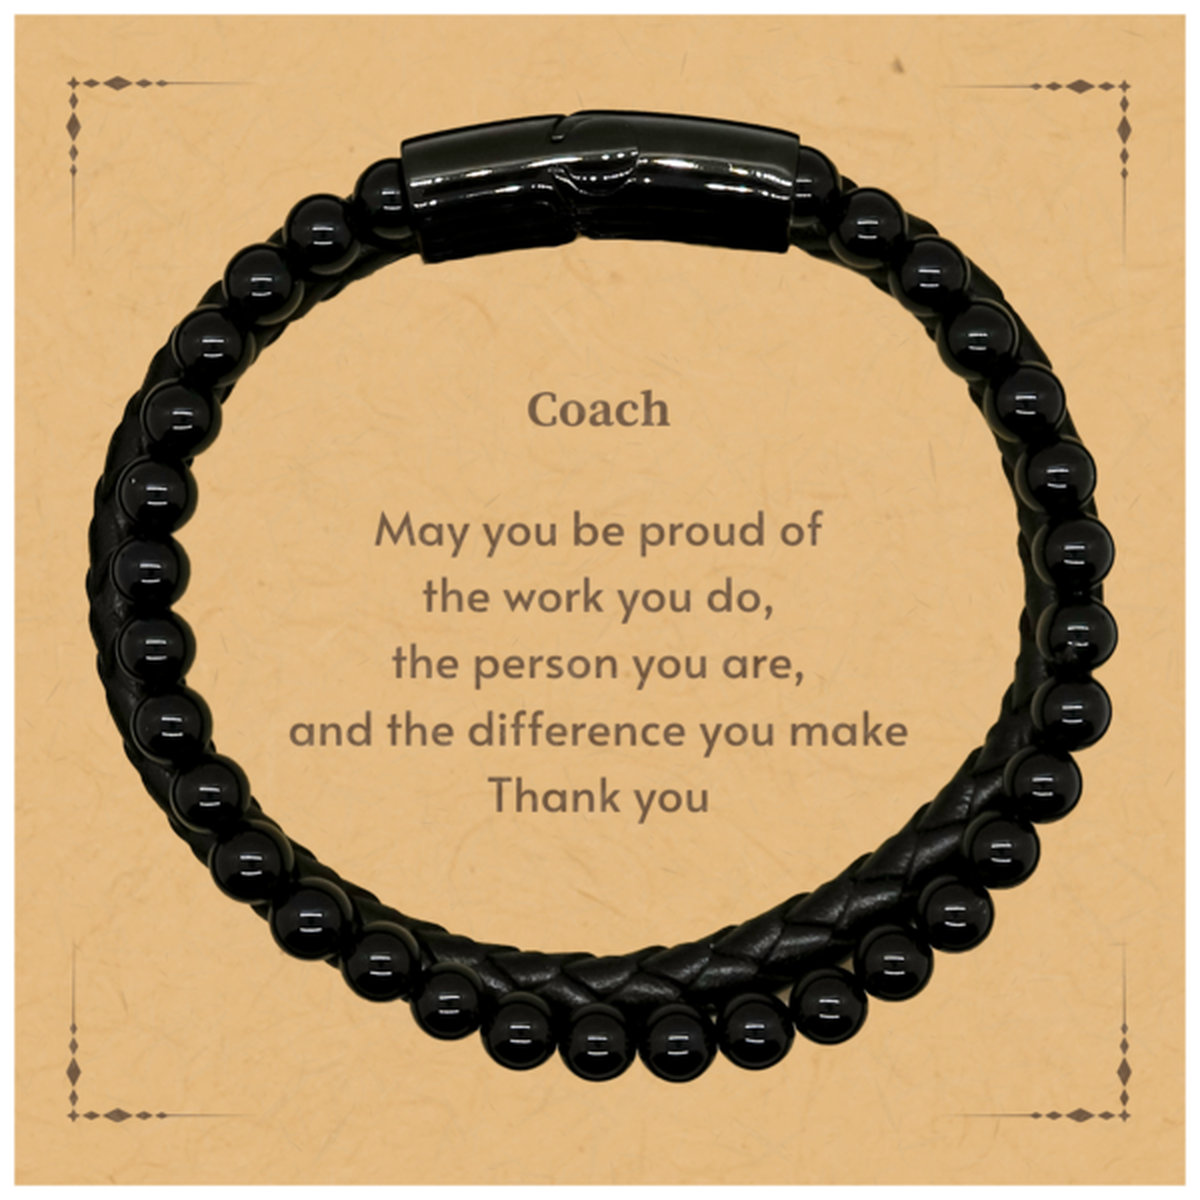 Heartwarming Stone Leather Bracelets Retirement Coworkers Gifts for Coach, Coach May You be proud of the work you do, the person you are Gifts for Boss Men Women Friends